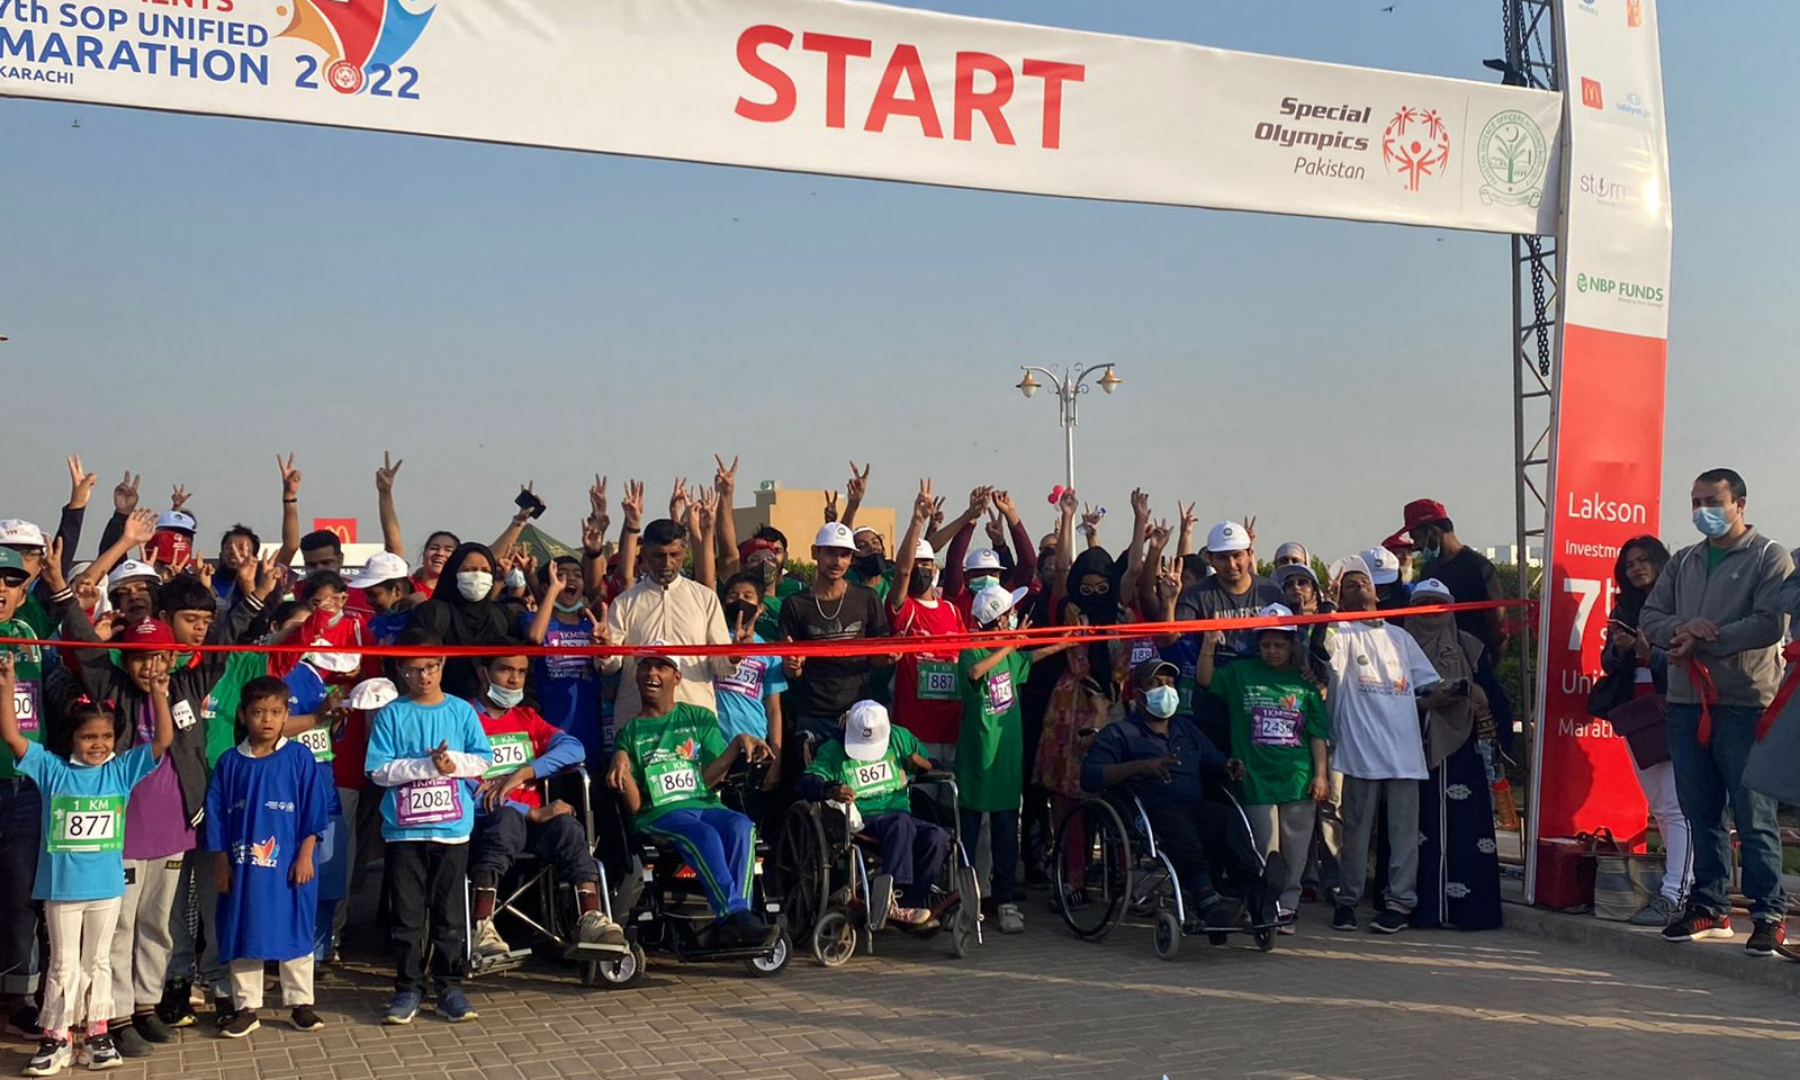 Participants of the 1km Unified Marathon await at the starting line cheering before the race kicks off. — Photos by author